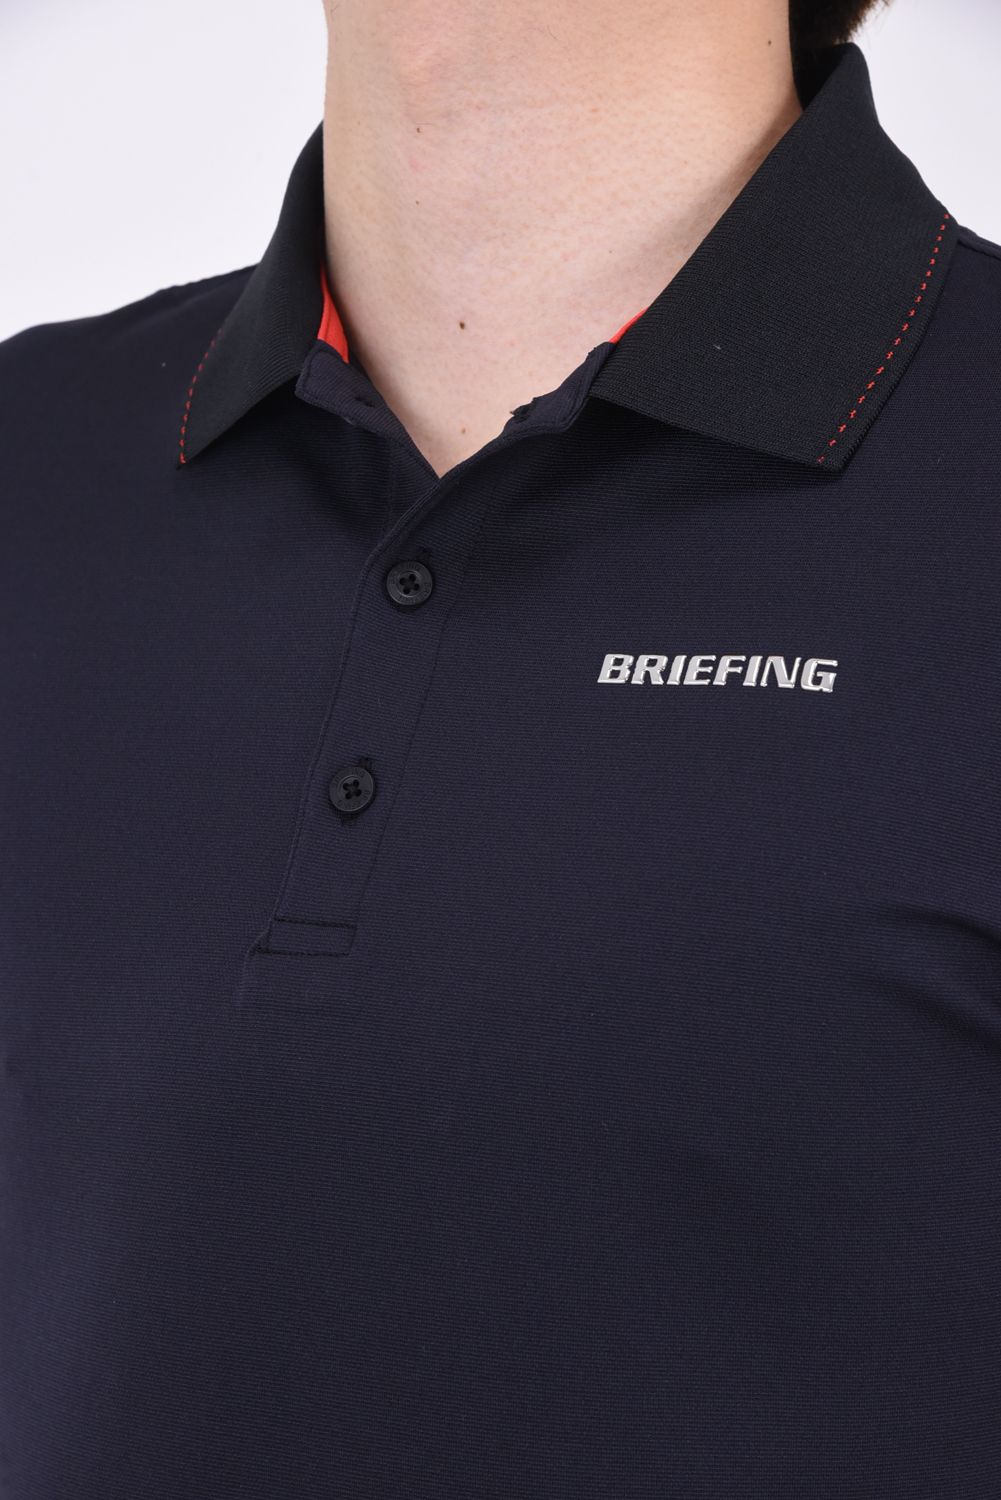 BRIEFING - MENS BASIC POLO / メタリックロゴ ベーシック ポロシャツ 